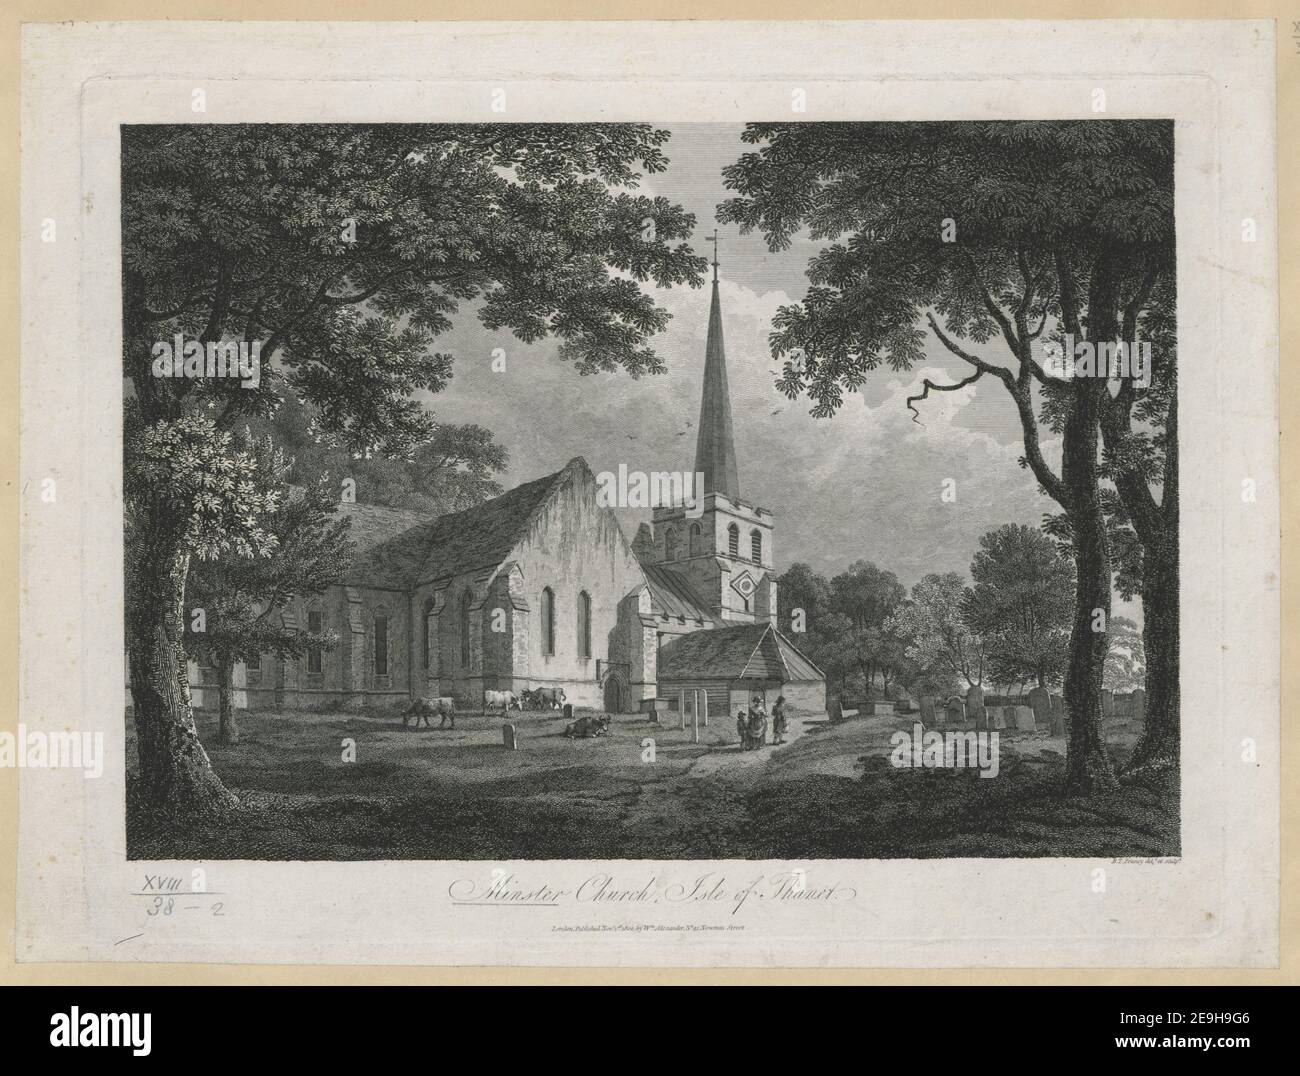 Minster Church, Isle of Thanet.  Author  Pouncy, Benjamin Thomas 18.38.2. Place of publication: London Publisher: Published Nov.r 1.st 1800, by Wm Alexander, No. 42 Newman Street., Date of publication: [1800]  Item type: 1 print Medium: etching Dimensions: platemark 27.8 x 36.5 cm.  Former owner: George III, King of Great Britain, 1738-1820 Stock Photo